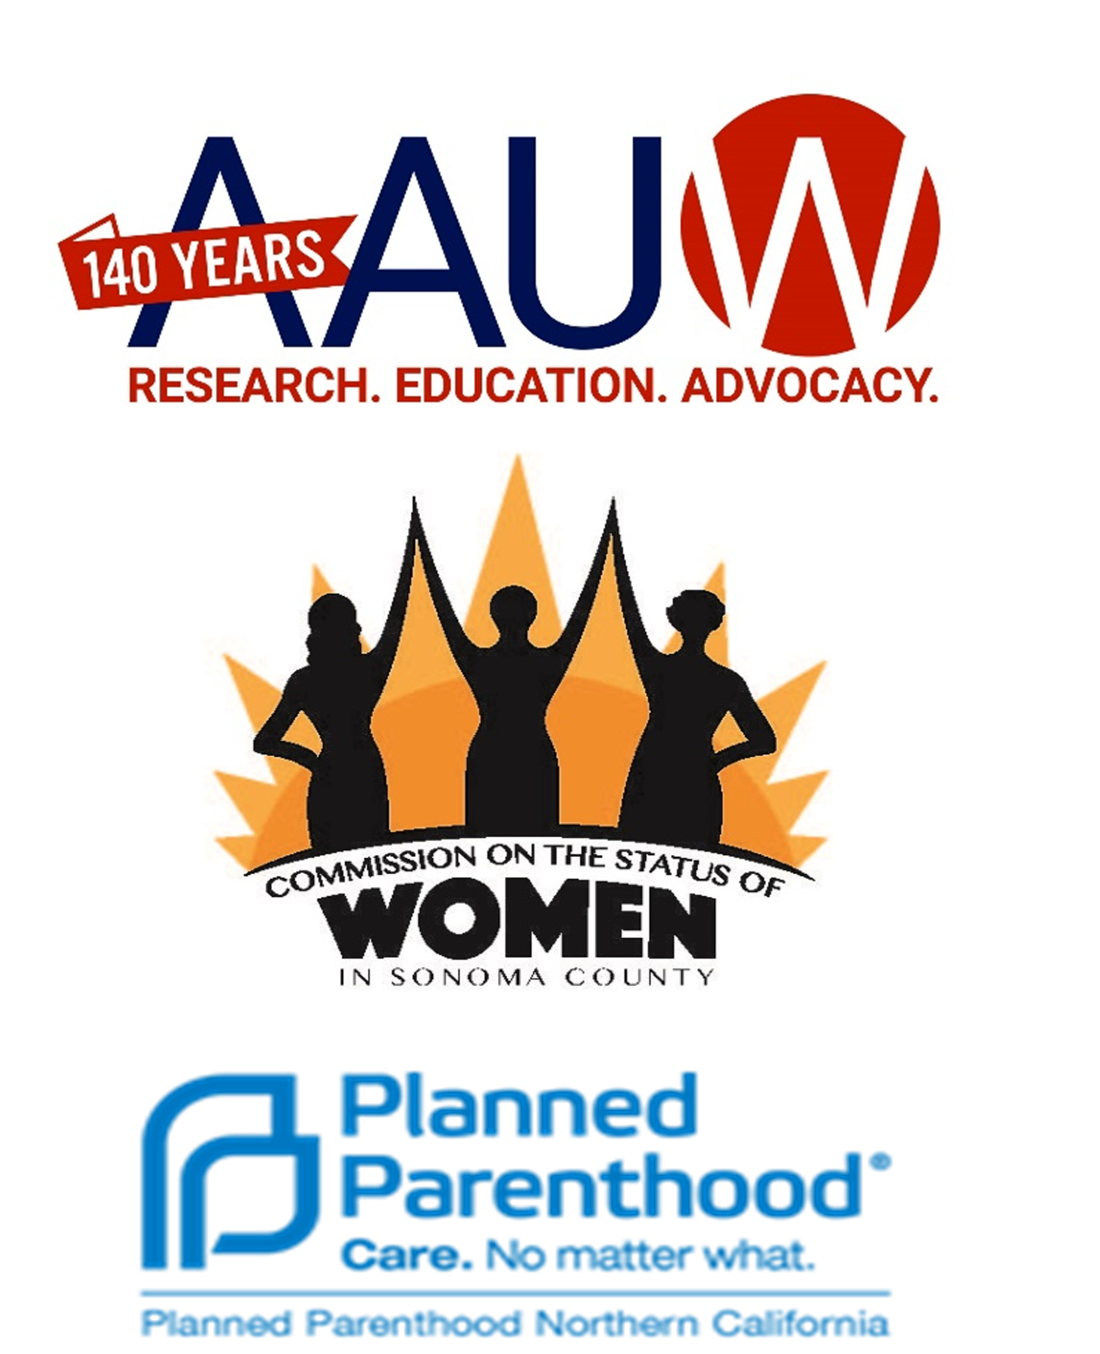 Logos for American Association of University Women, The Commission on the Status of Women Sonoma County, and Planned Parenthood